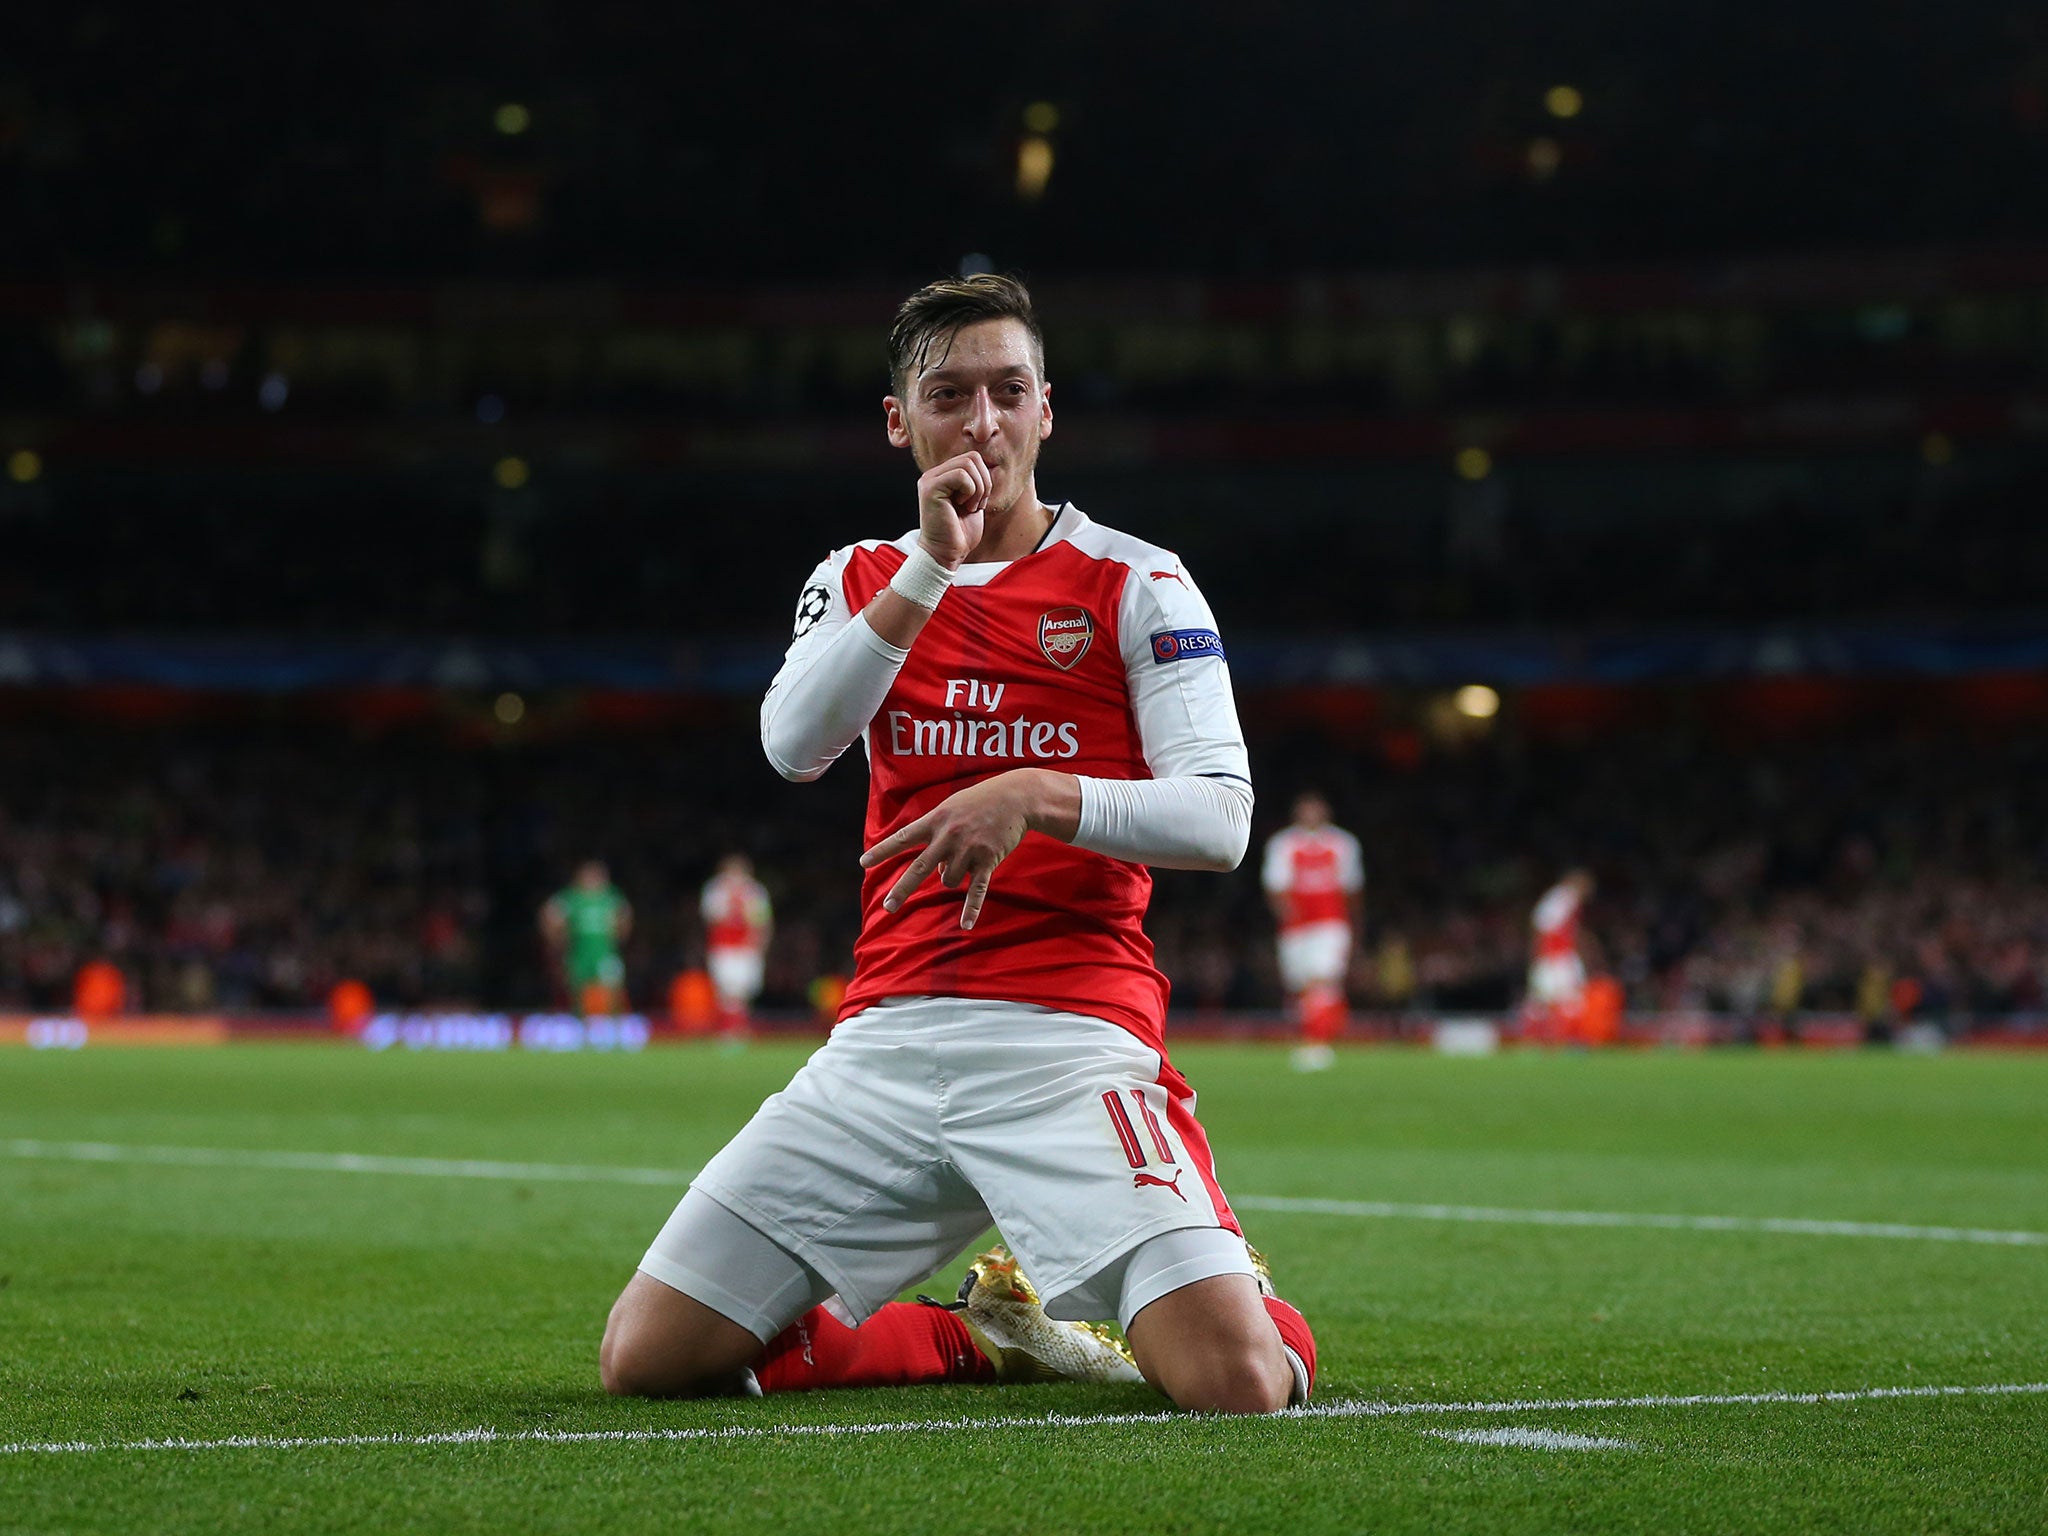 Ozil scored a second half hat-trick to help fire Arsenal to a 6-0 victory at the Emirates